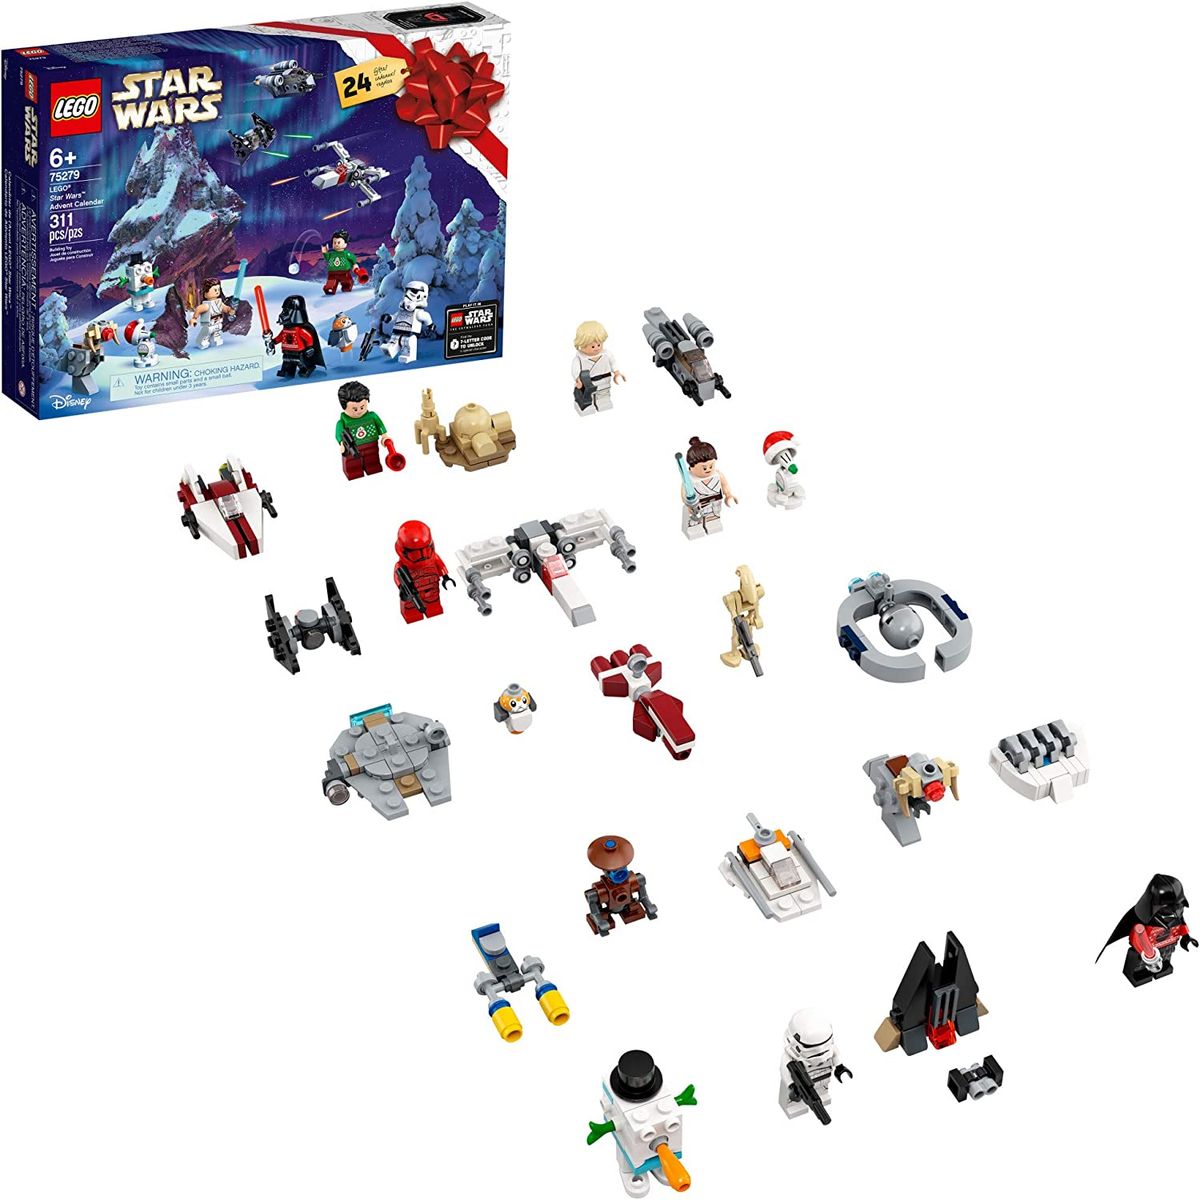 Best Prime Day Toy Deals 2020 The Best Lego And Stem Sets Marvel And Funko Figures And More Techradar - cant miss bargains on roblox action series 2 full box set